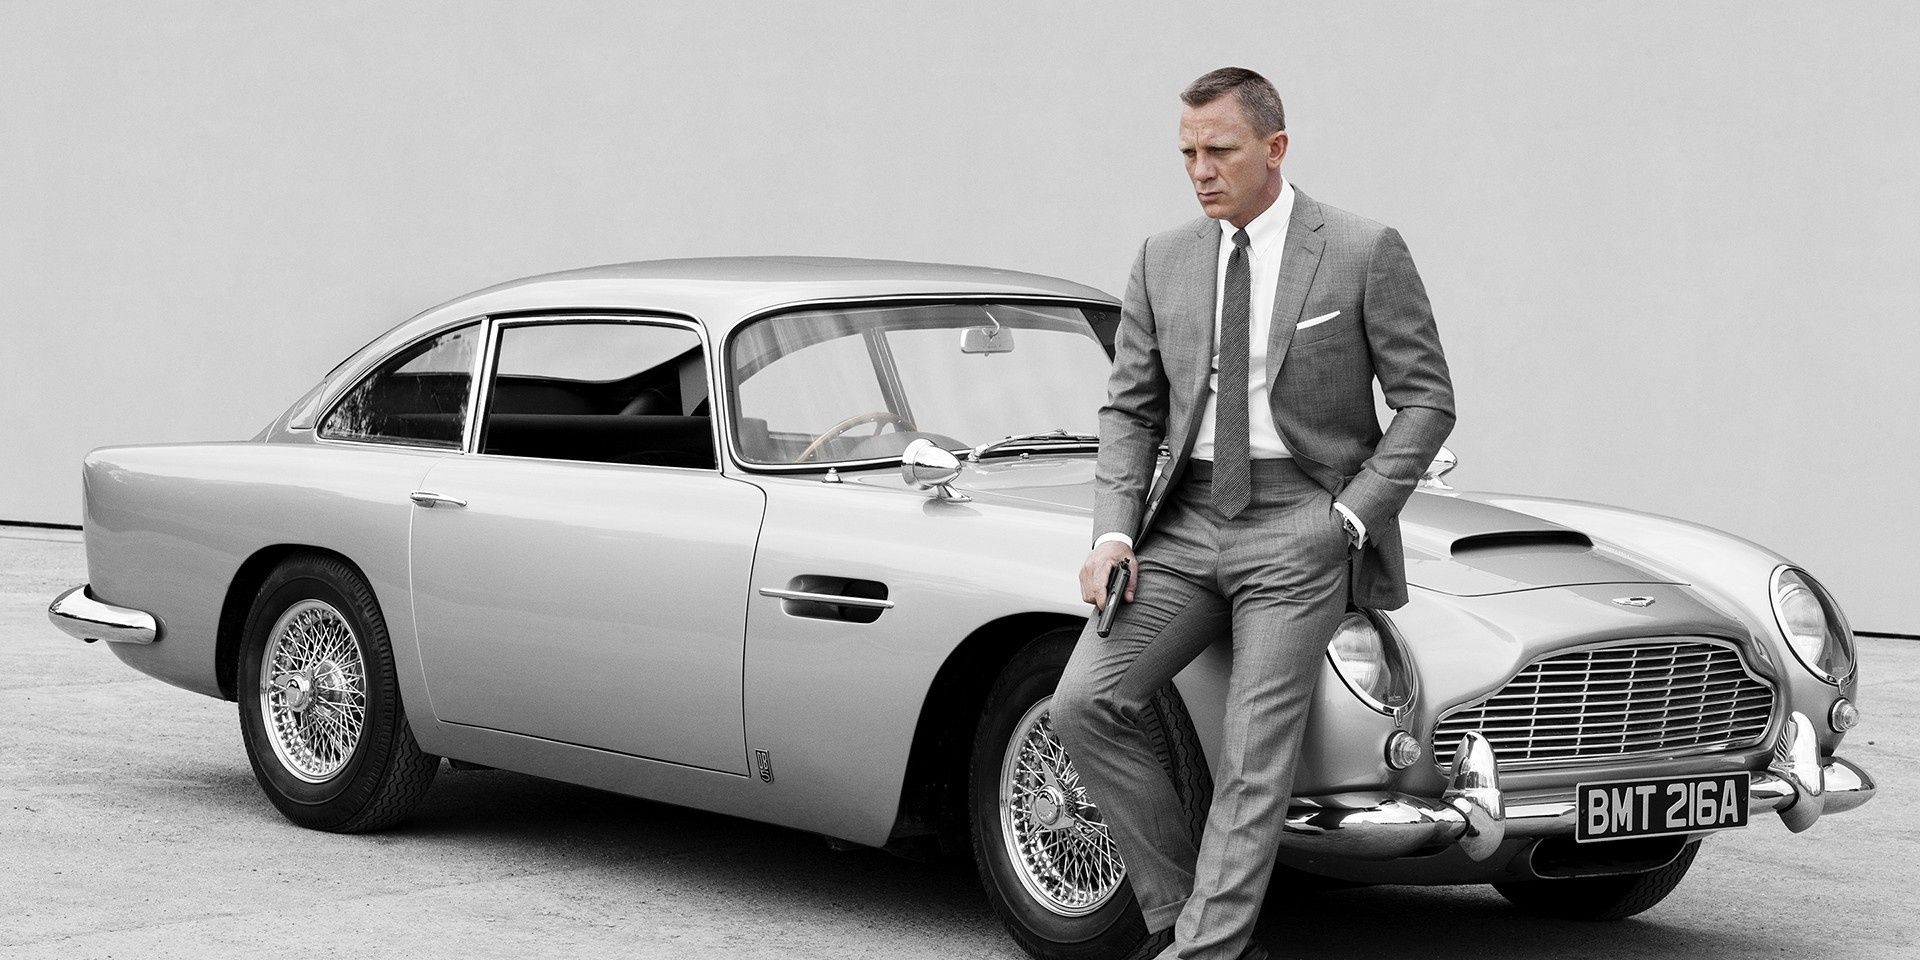 James Bond's Aston Martin DB5 Recently Auctioned in 26.15 Crore news